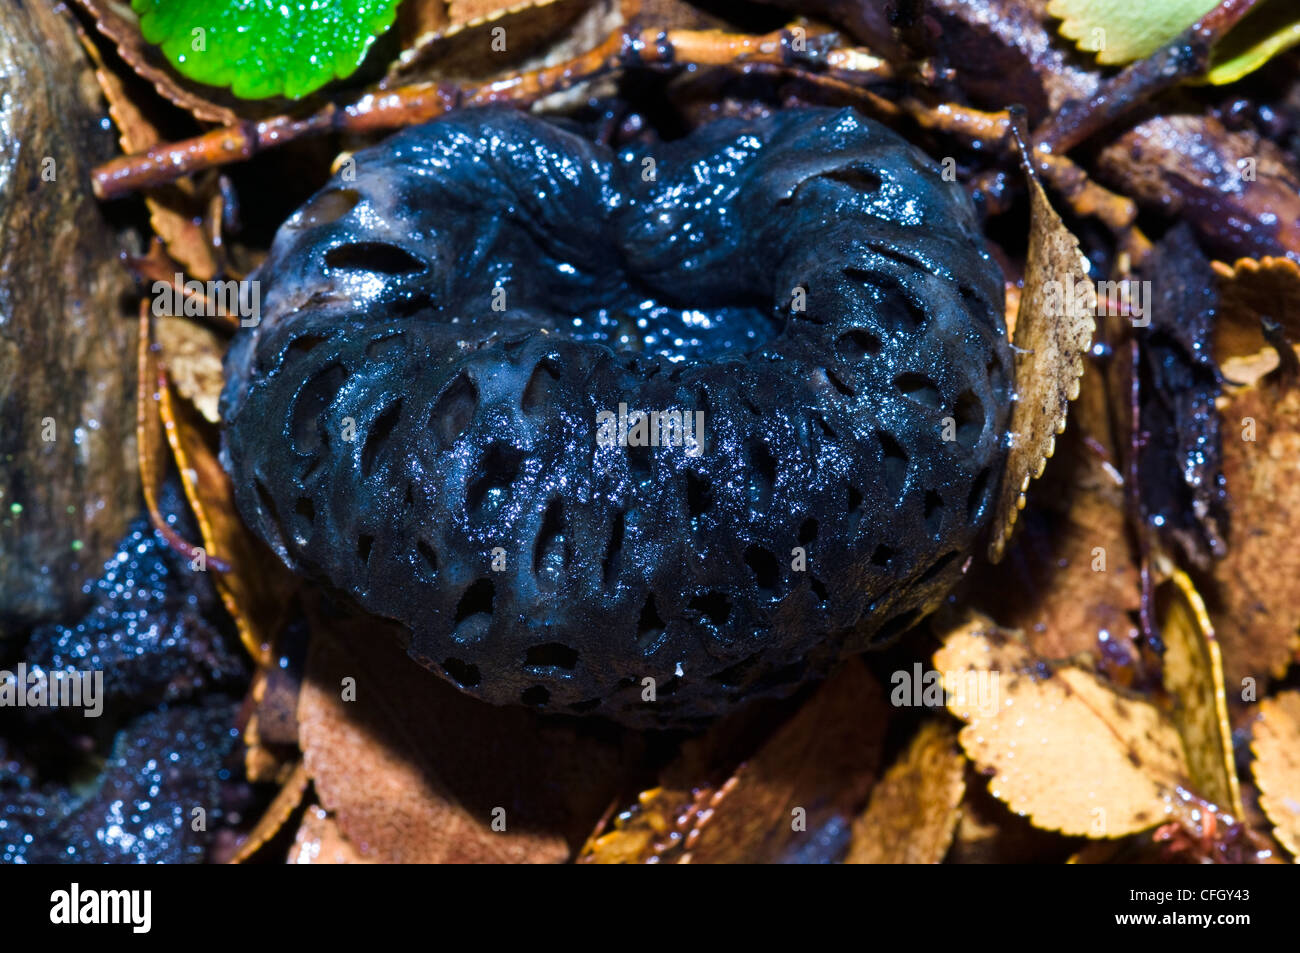 A rotting Indian Bread Fungus in the leaf litter of a beech tree. Stock Photo